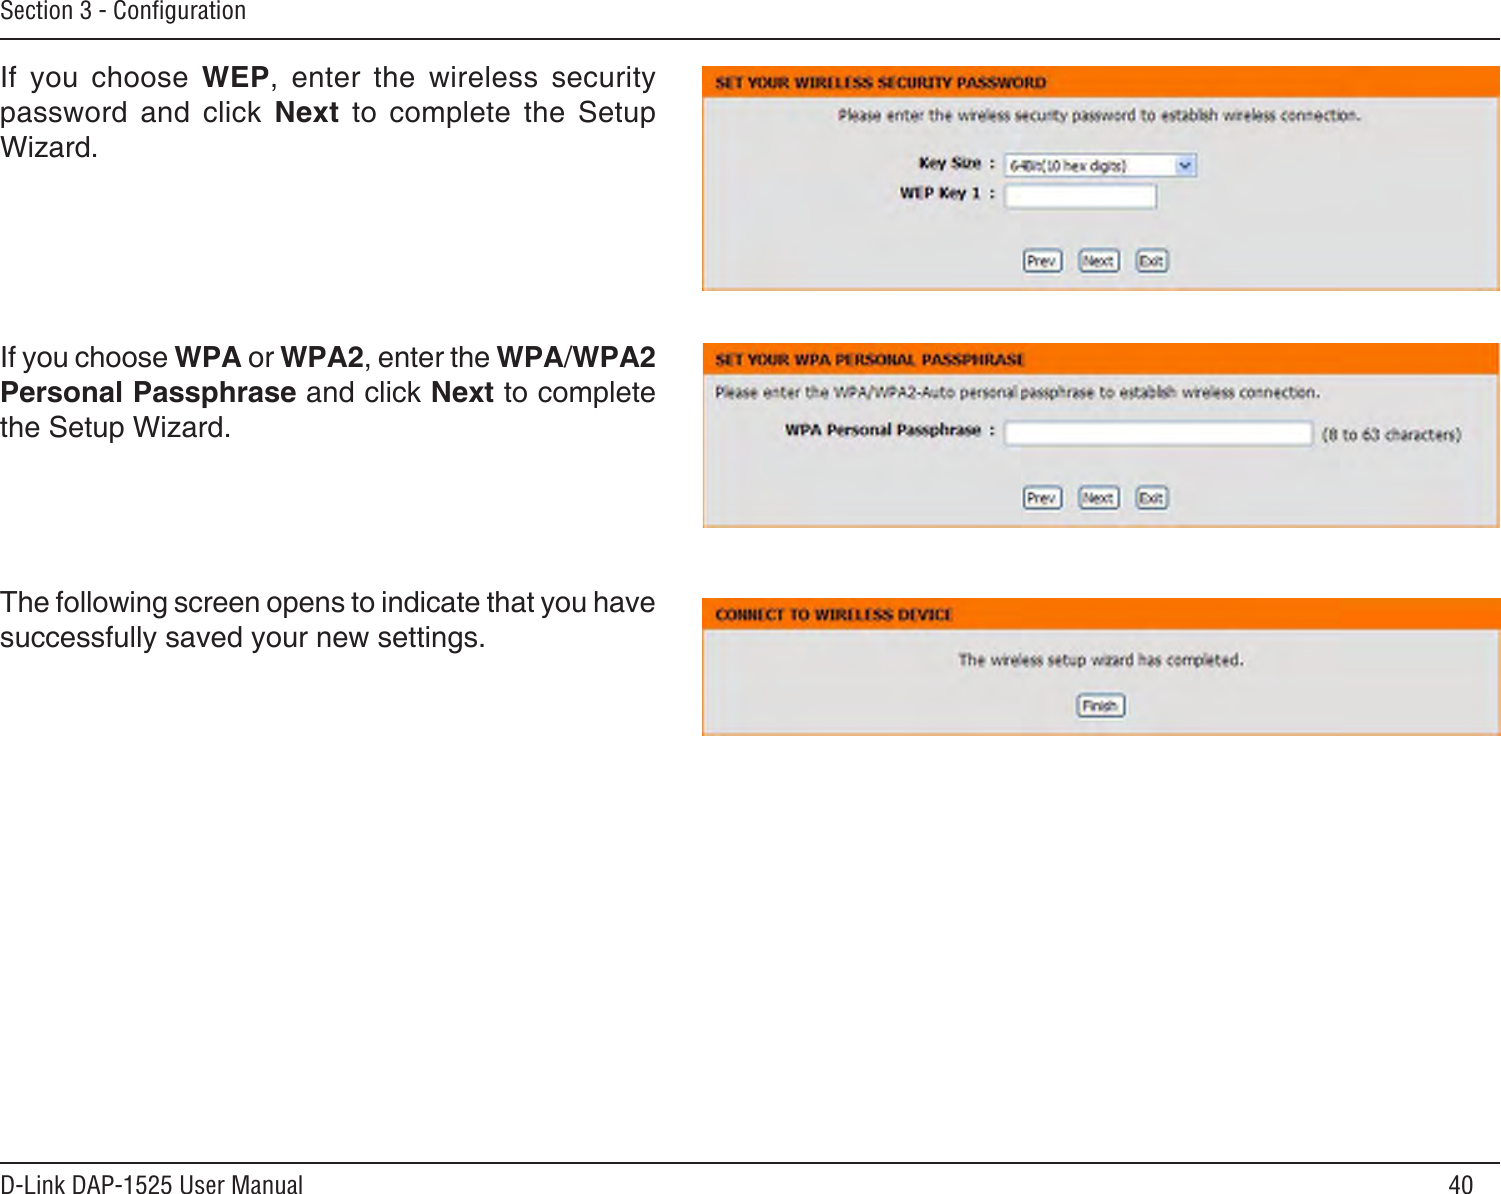 40D-Link DAP-1525 User ManualSection 3 - ConﬁgurationIf  you  choose  WEP,  enter  the  wireless  security password  and  click  Next  to  complete  the  Setup Wizard.If you choose WPA or WPA2, enter the WPA/WPA2 Personal Passphrase and click Next to complete the Setup Wizard.The following screen opens to indicate that you have successfully saved your new settings.